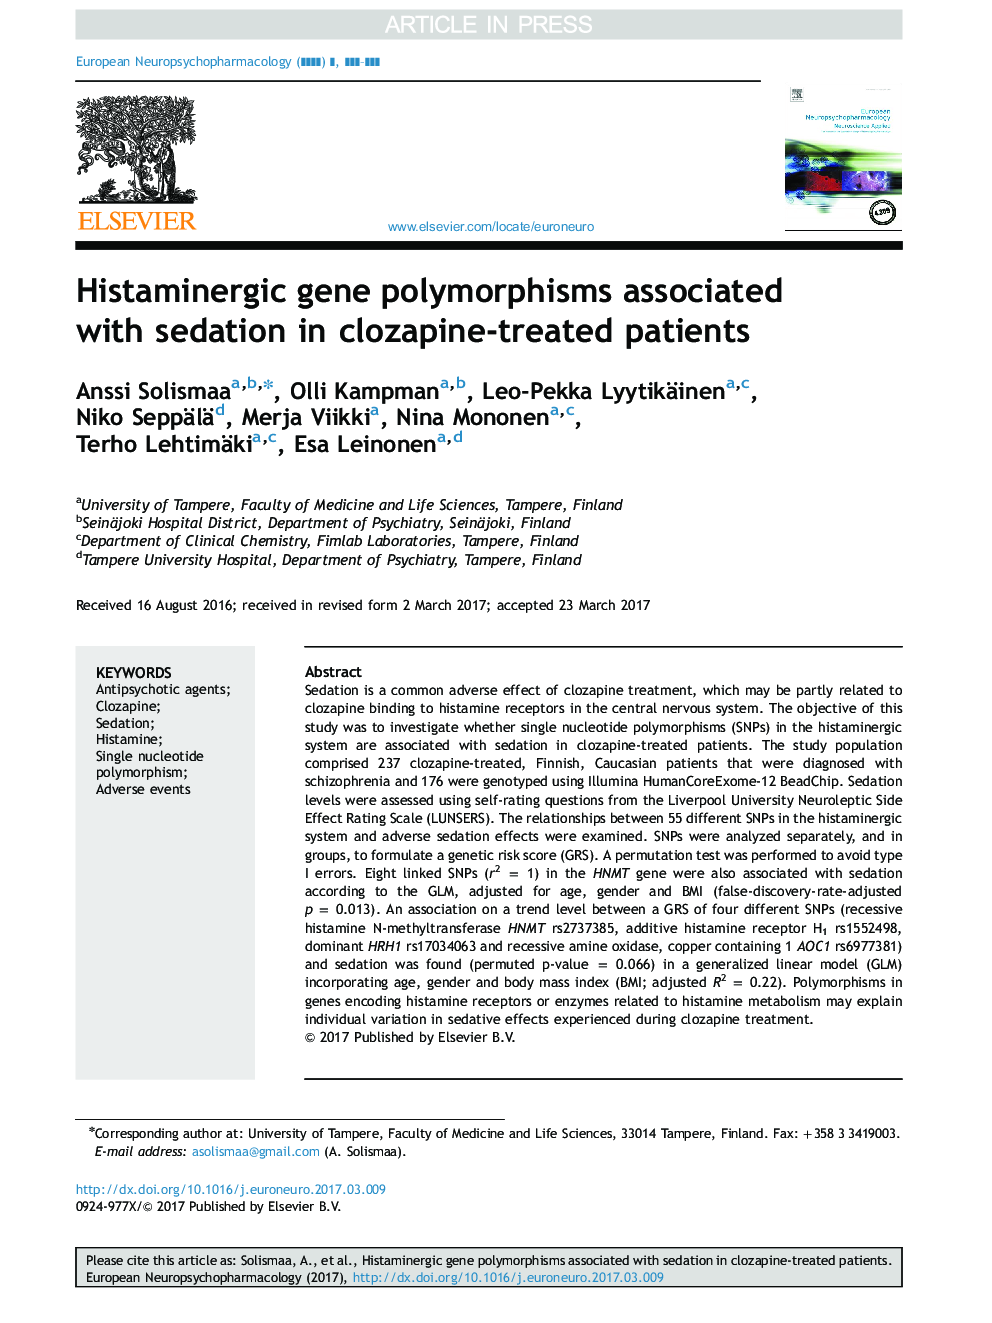 Histaminergic gene polymorphisms associated with sedation in clozapine-treated patients